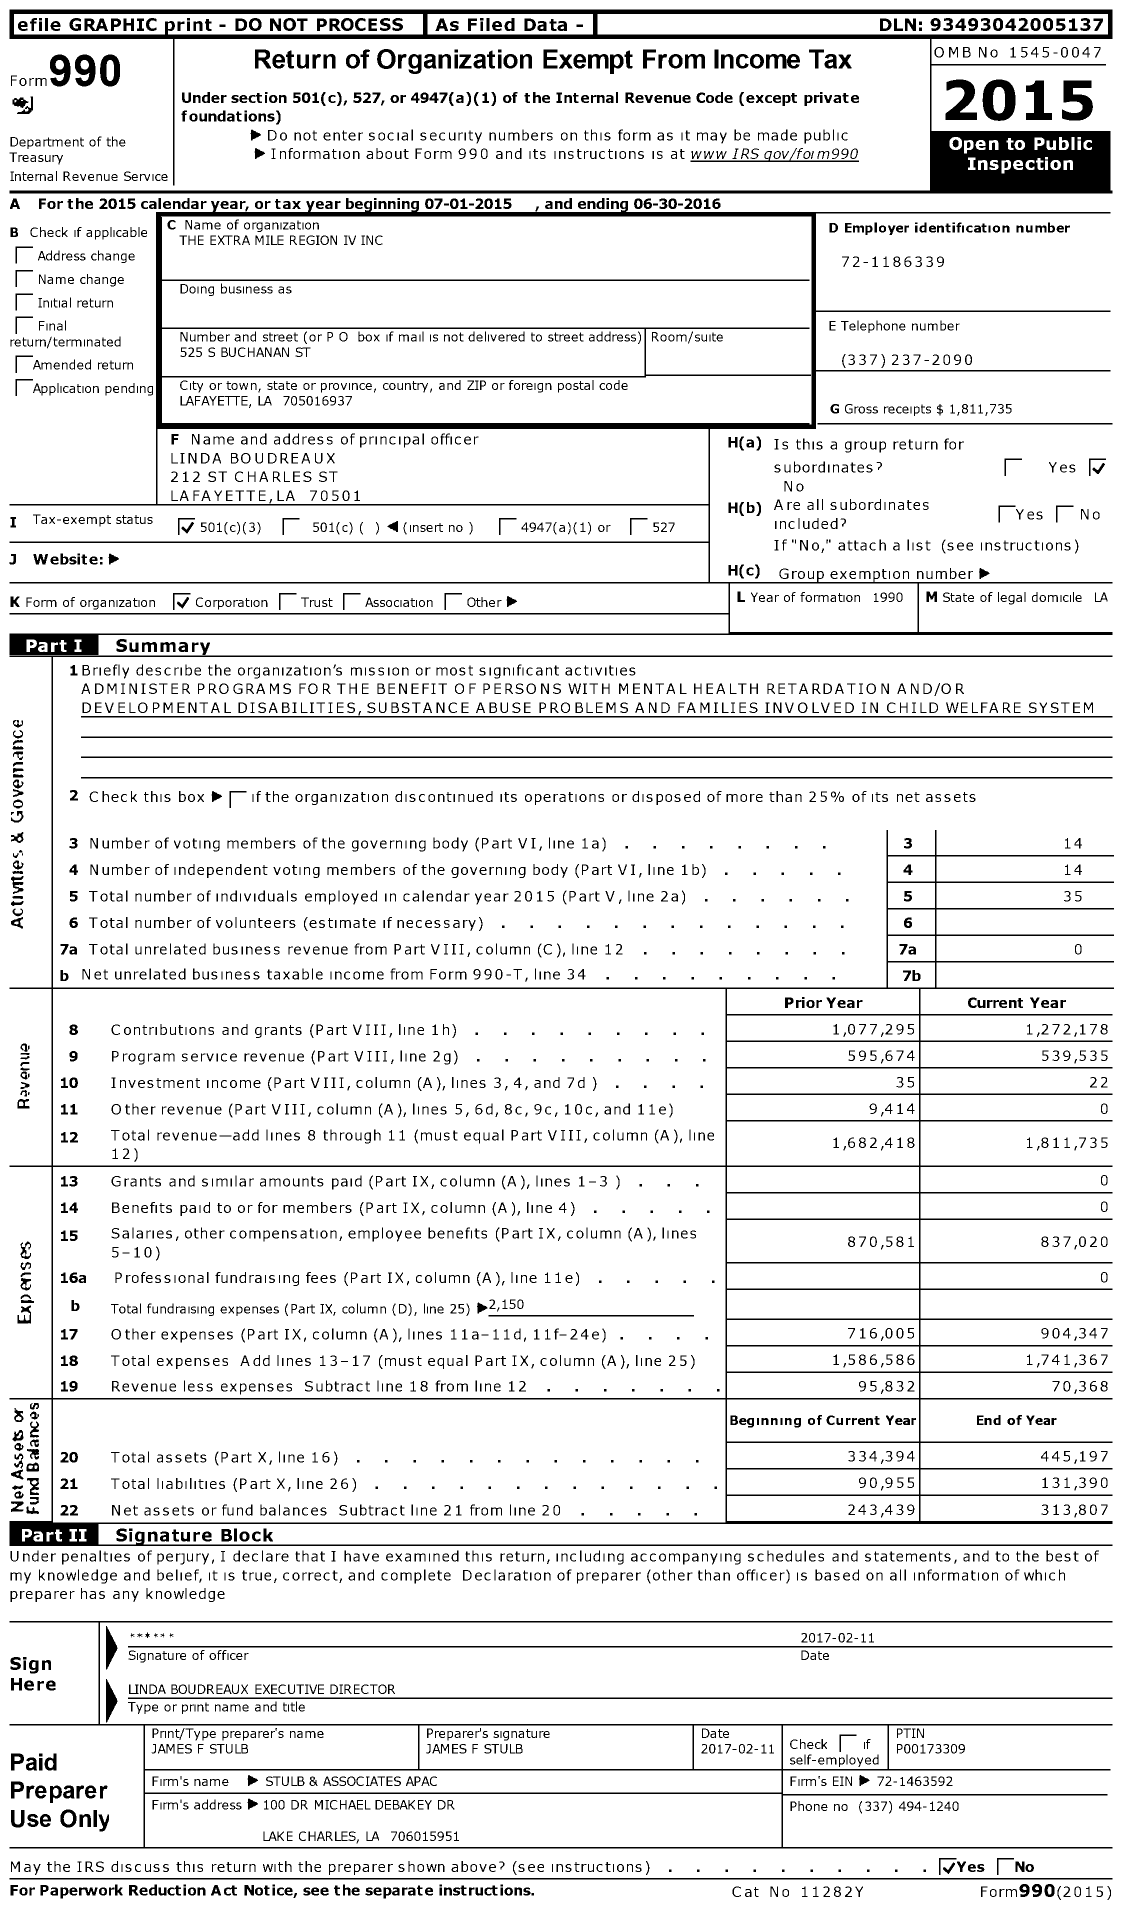 Image of first page of 2015 Form 990 for The Extra Mile Region Iv